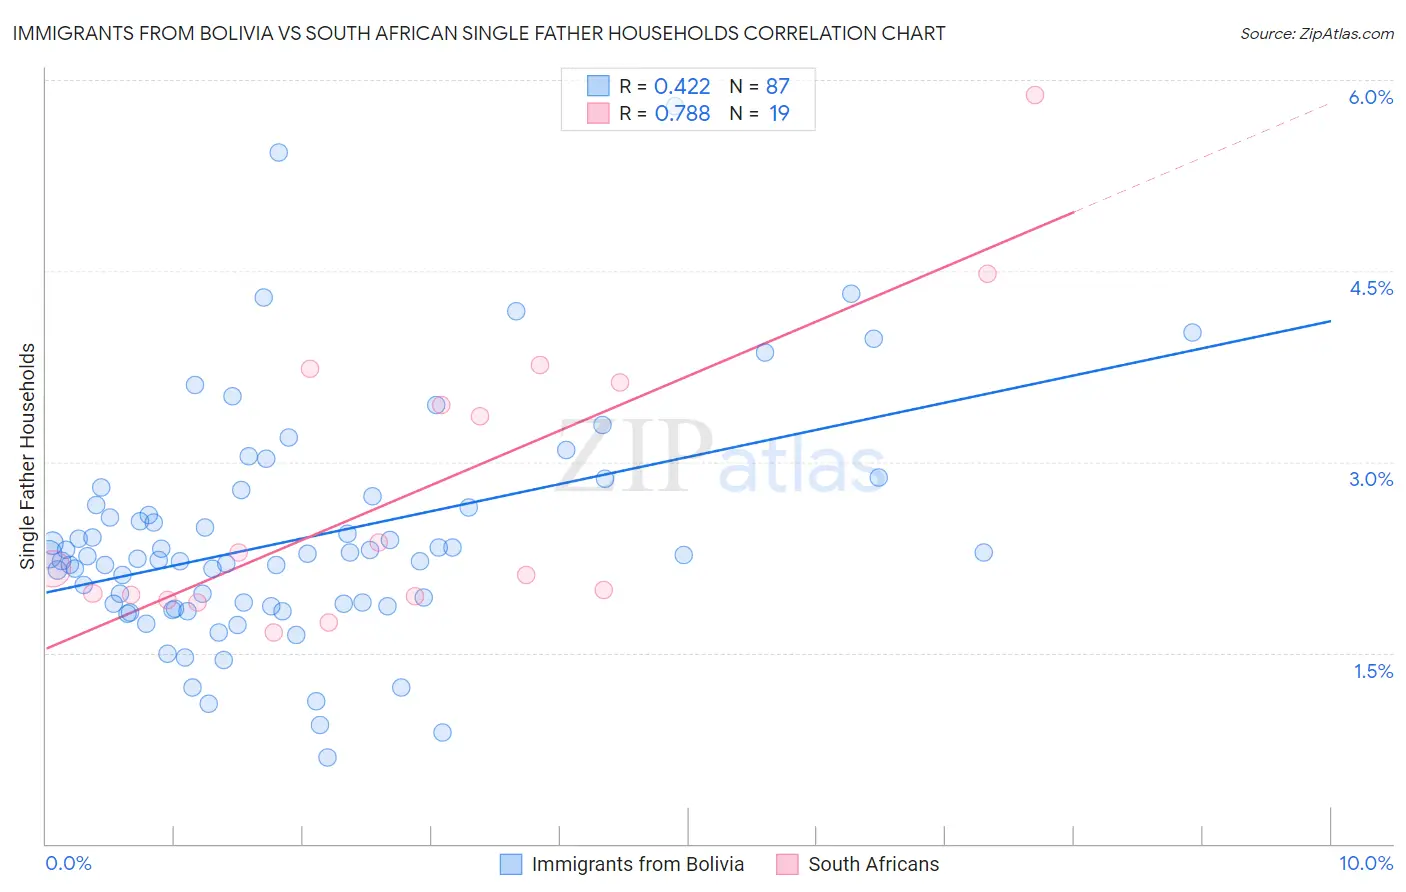 Immigrants from Bolivia vs South African Single Father Households